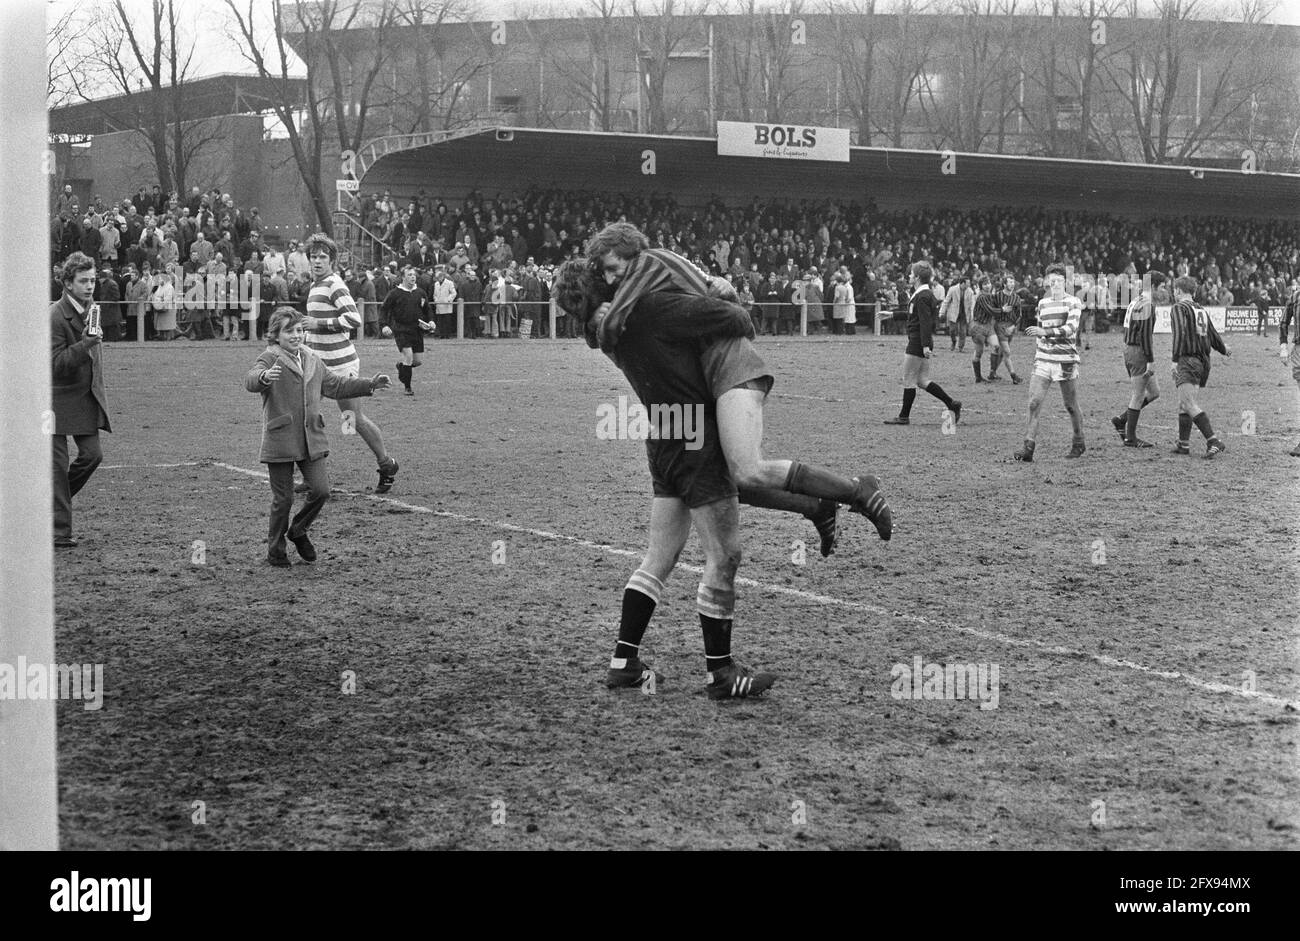 Blue-White v Excelsior 0-1. Embrace of Kleingeld and Geelman, February 22, 1970, sports, soccer, The Netherlands, 20th century press agency photo, news to remember, documentary, historic photography 1945-1990, visual stories, human history of the Twentieth Century, capturing moments in time Stock Photo